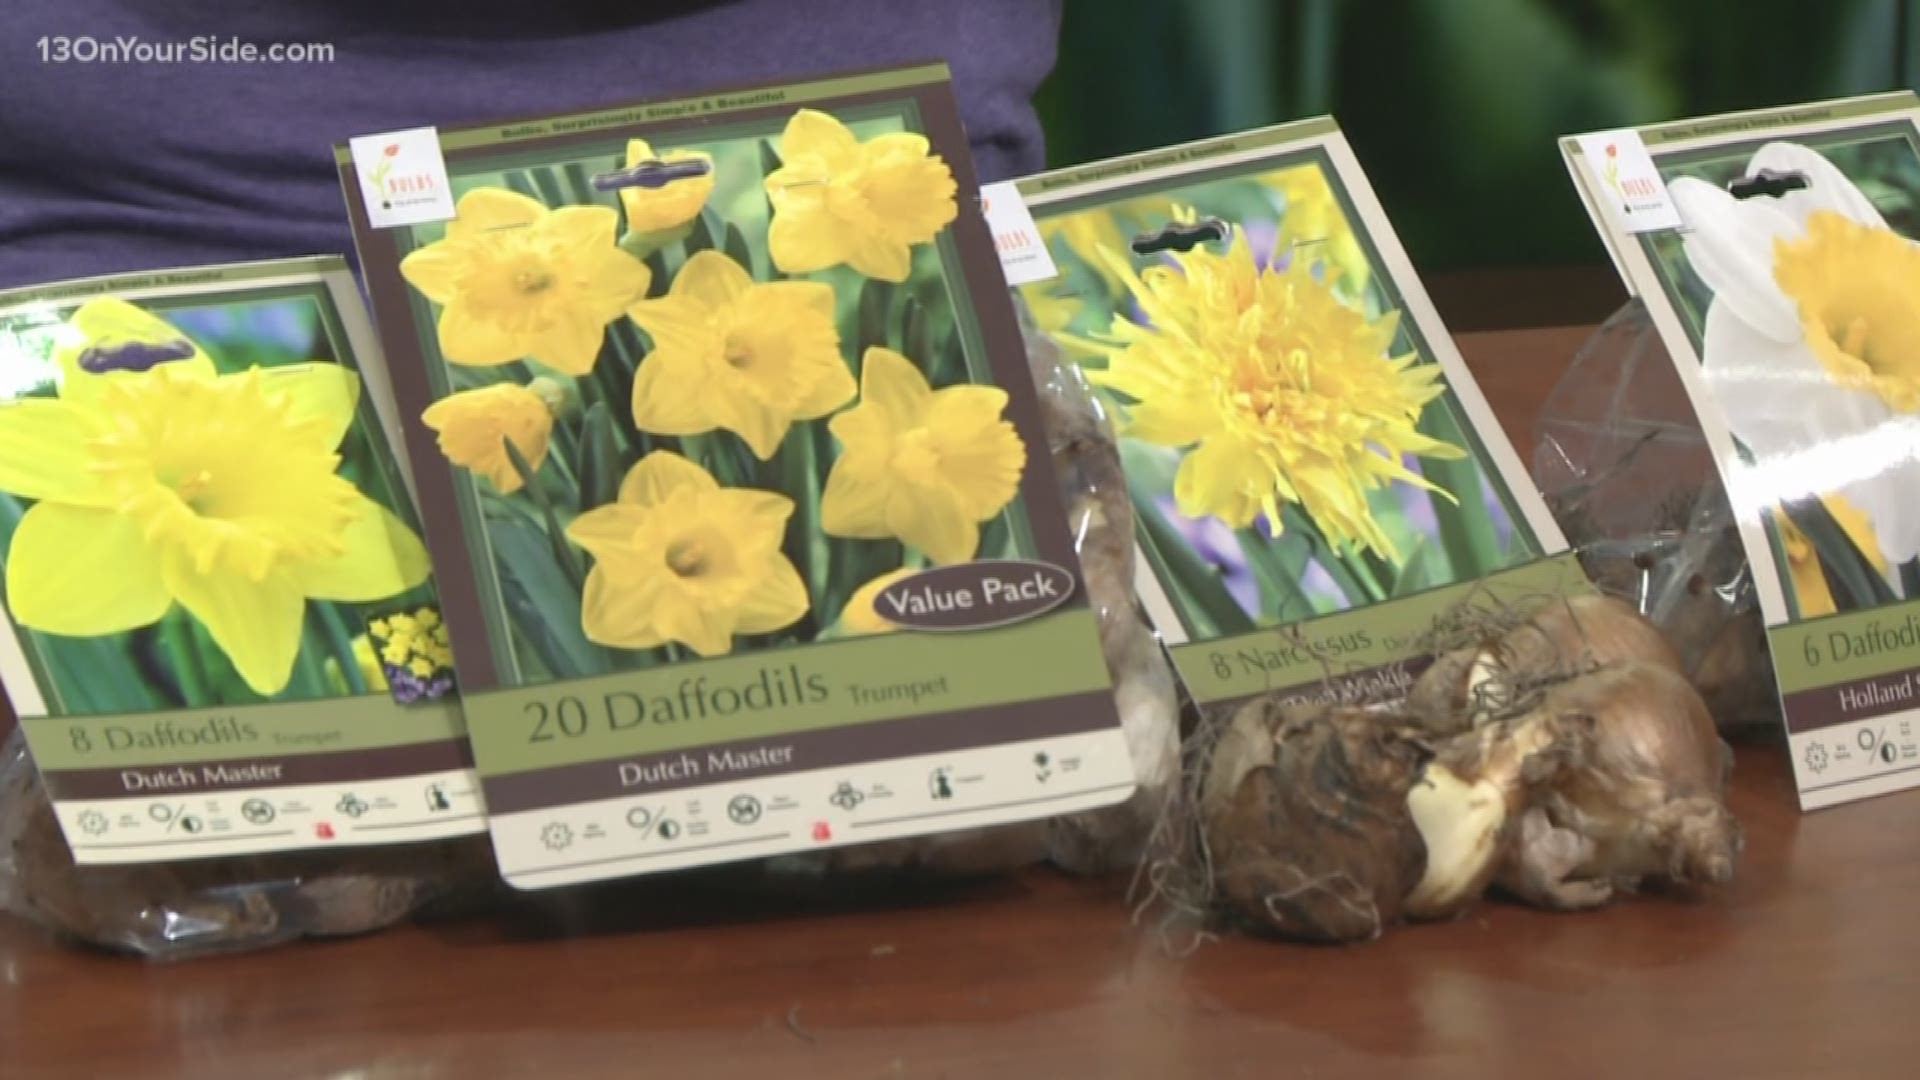 Every year we look to spring as the time for planting, renewal, and getting your garden started. However, you can help make your garden something special all year long by planting some things in the fall. Katey from Romence Gardens shares some of the best bulbs to plant in the fall to have a beautiful next year.